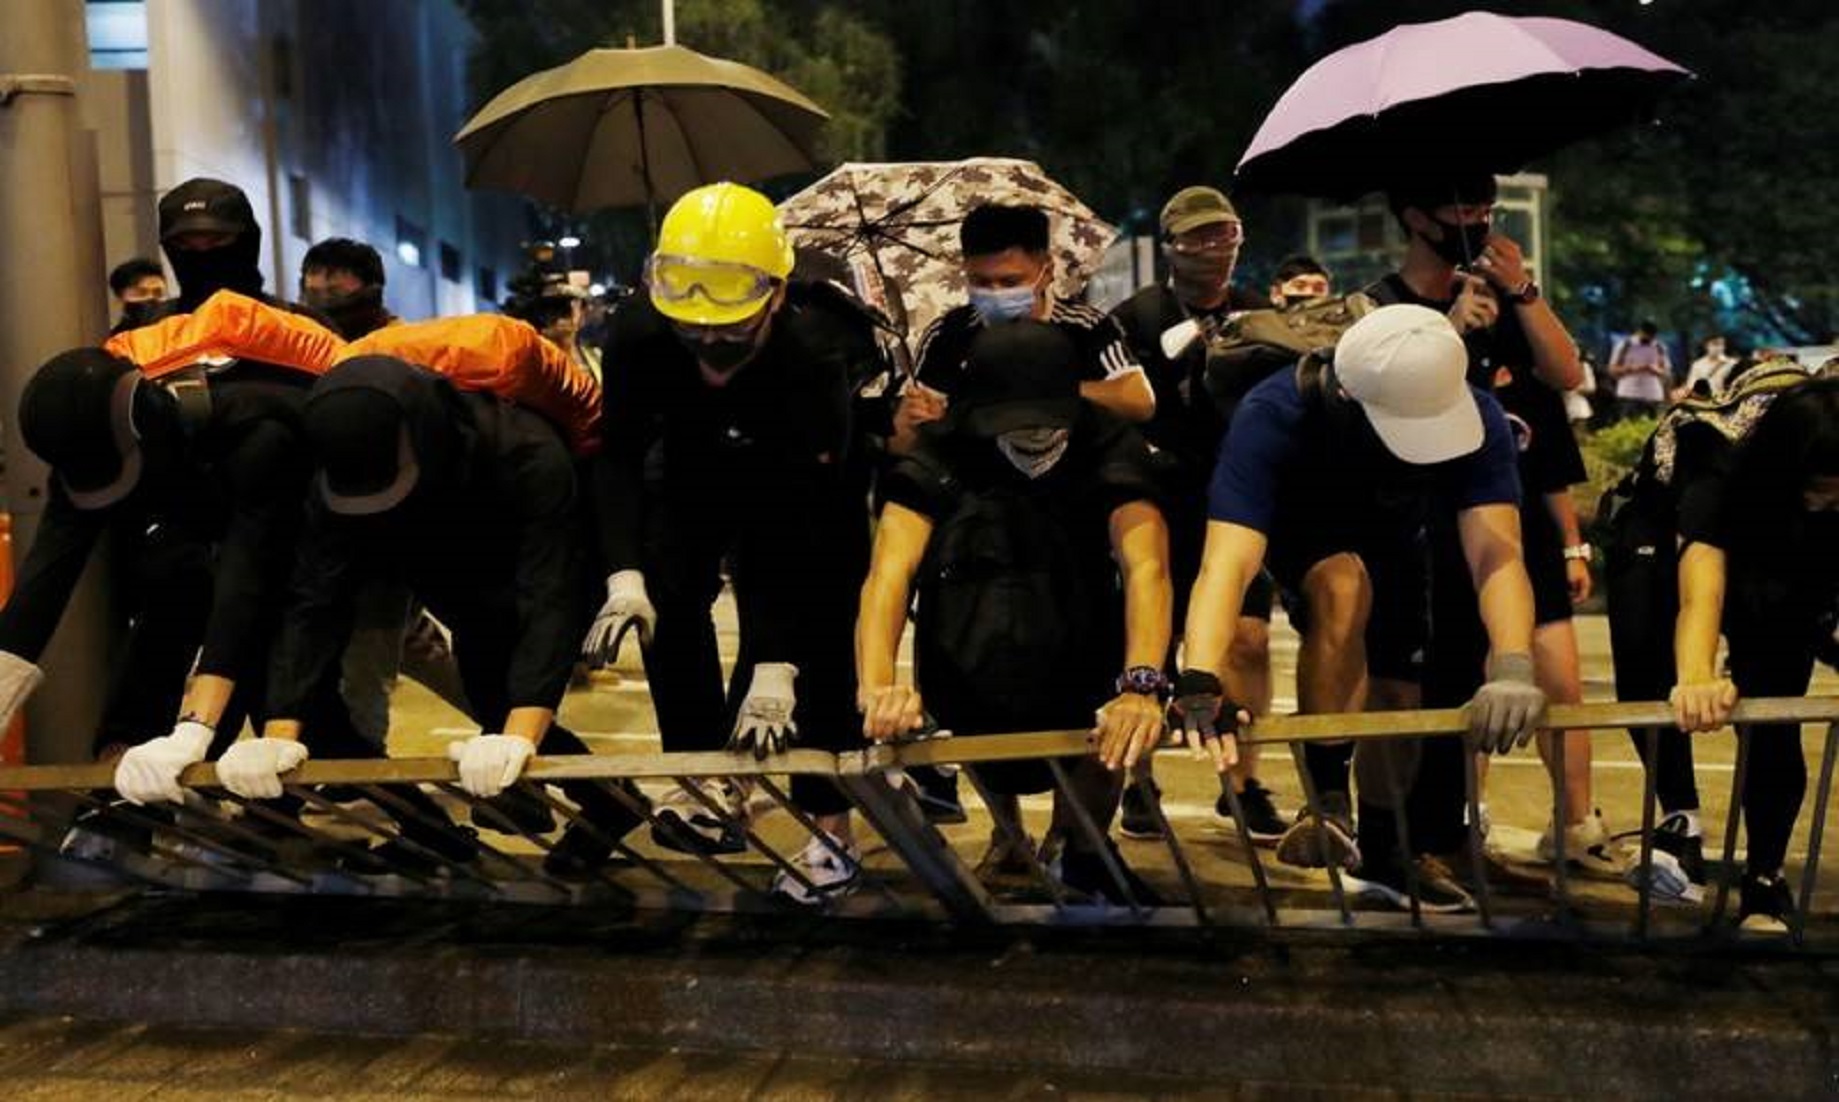 Hong Kong’s public safety in jeopardy, says government